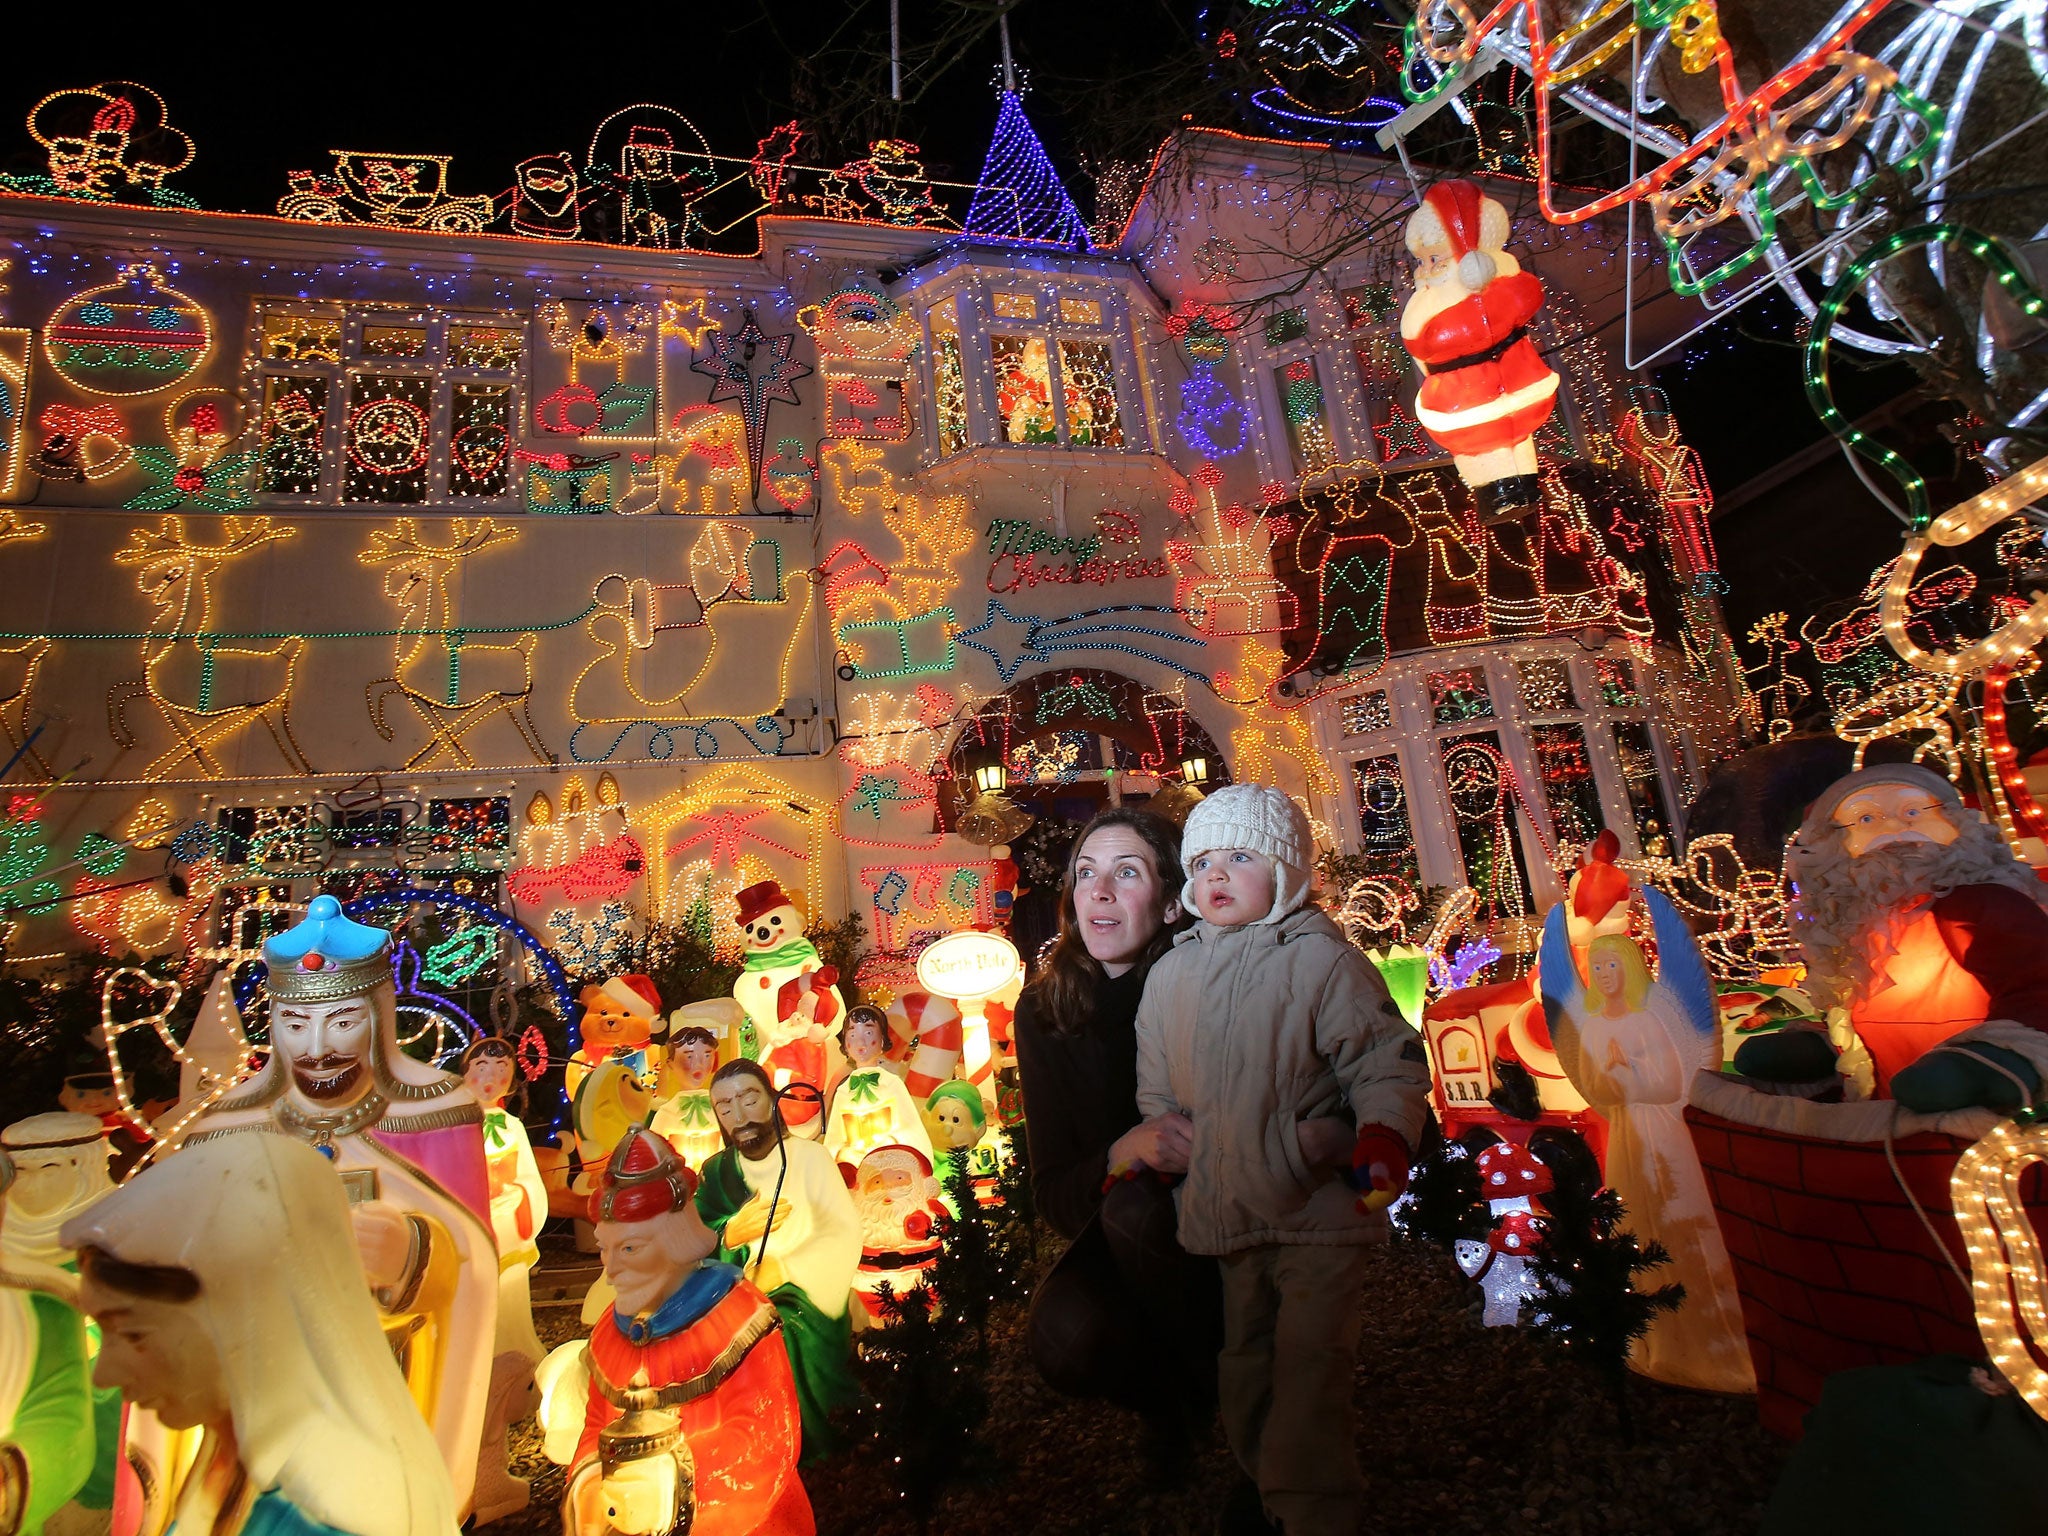 Anna Barclay and son Zac, 2, stop to look at Christmas festive lights that adorn a detached house in a suburban street in Melksham, December 8, 2012 in Melksham, England